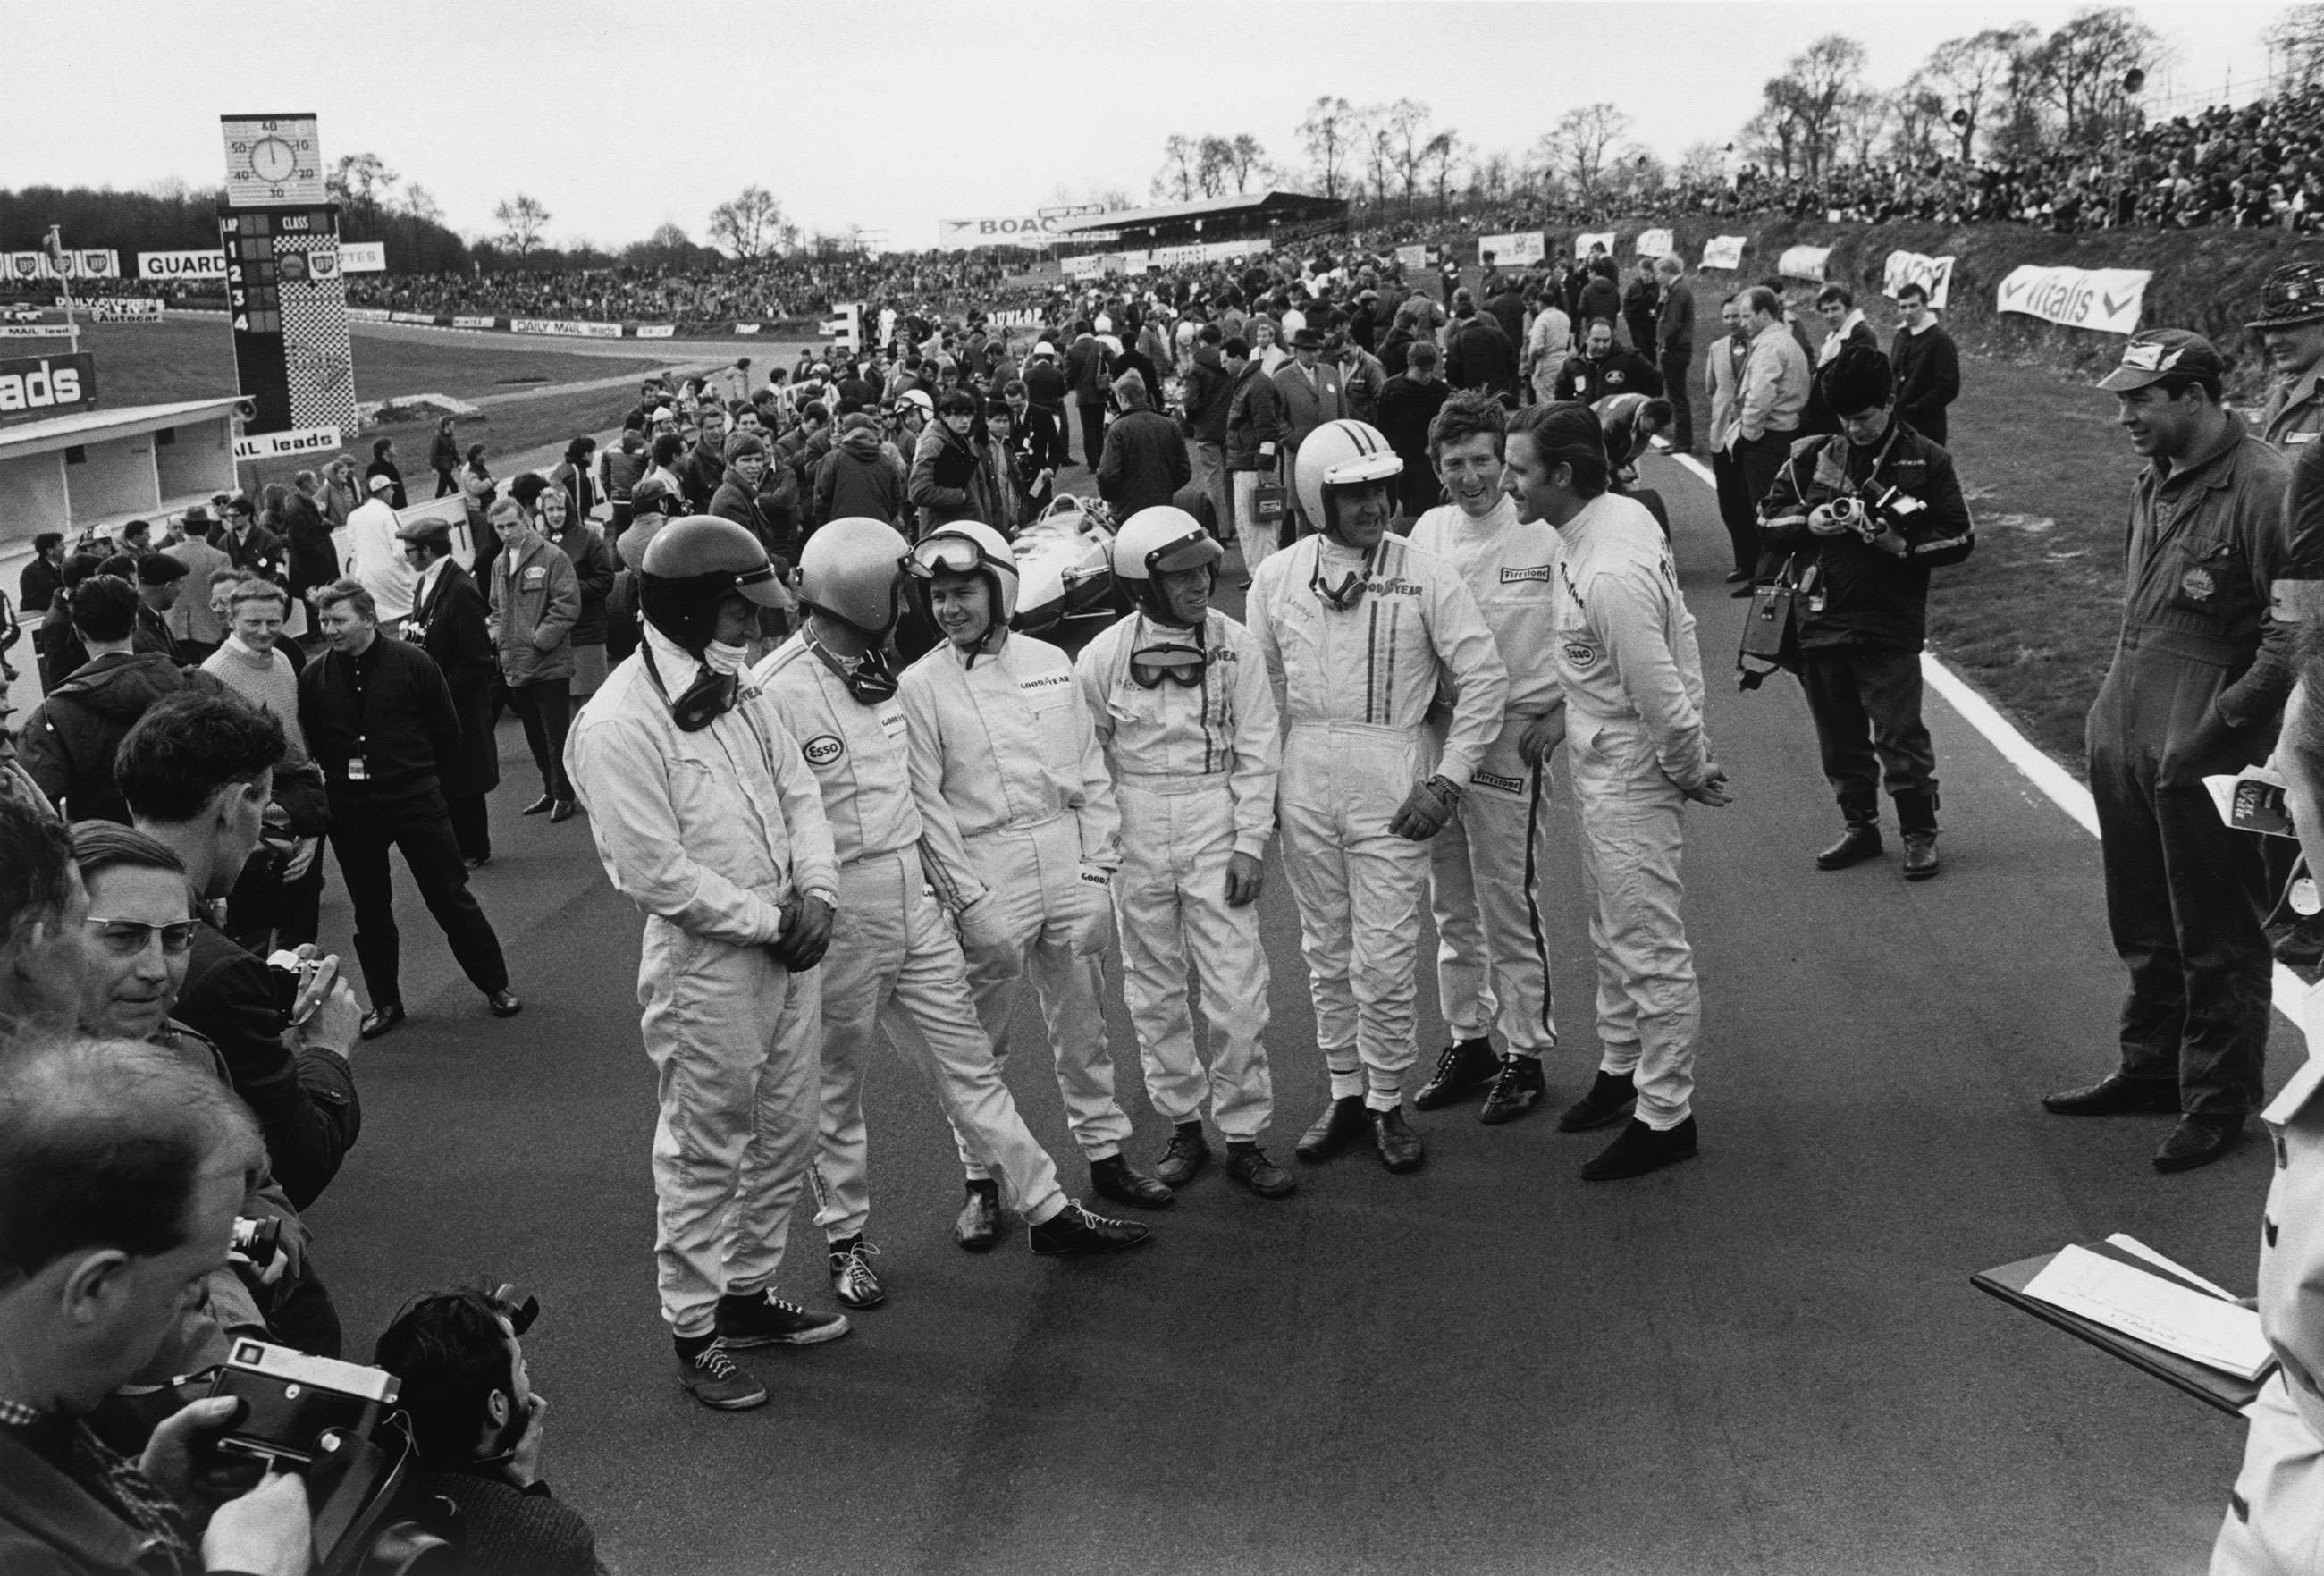 Race of Champions, Brands Hatch, 1967. From left to right: Dan Gurney, Jack Brabham, Bruce McLaren, Richie Ginther, Denny Hulme, Jochen Rindt and Graham Hill.